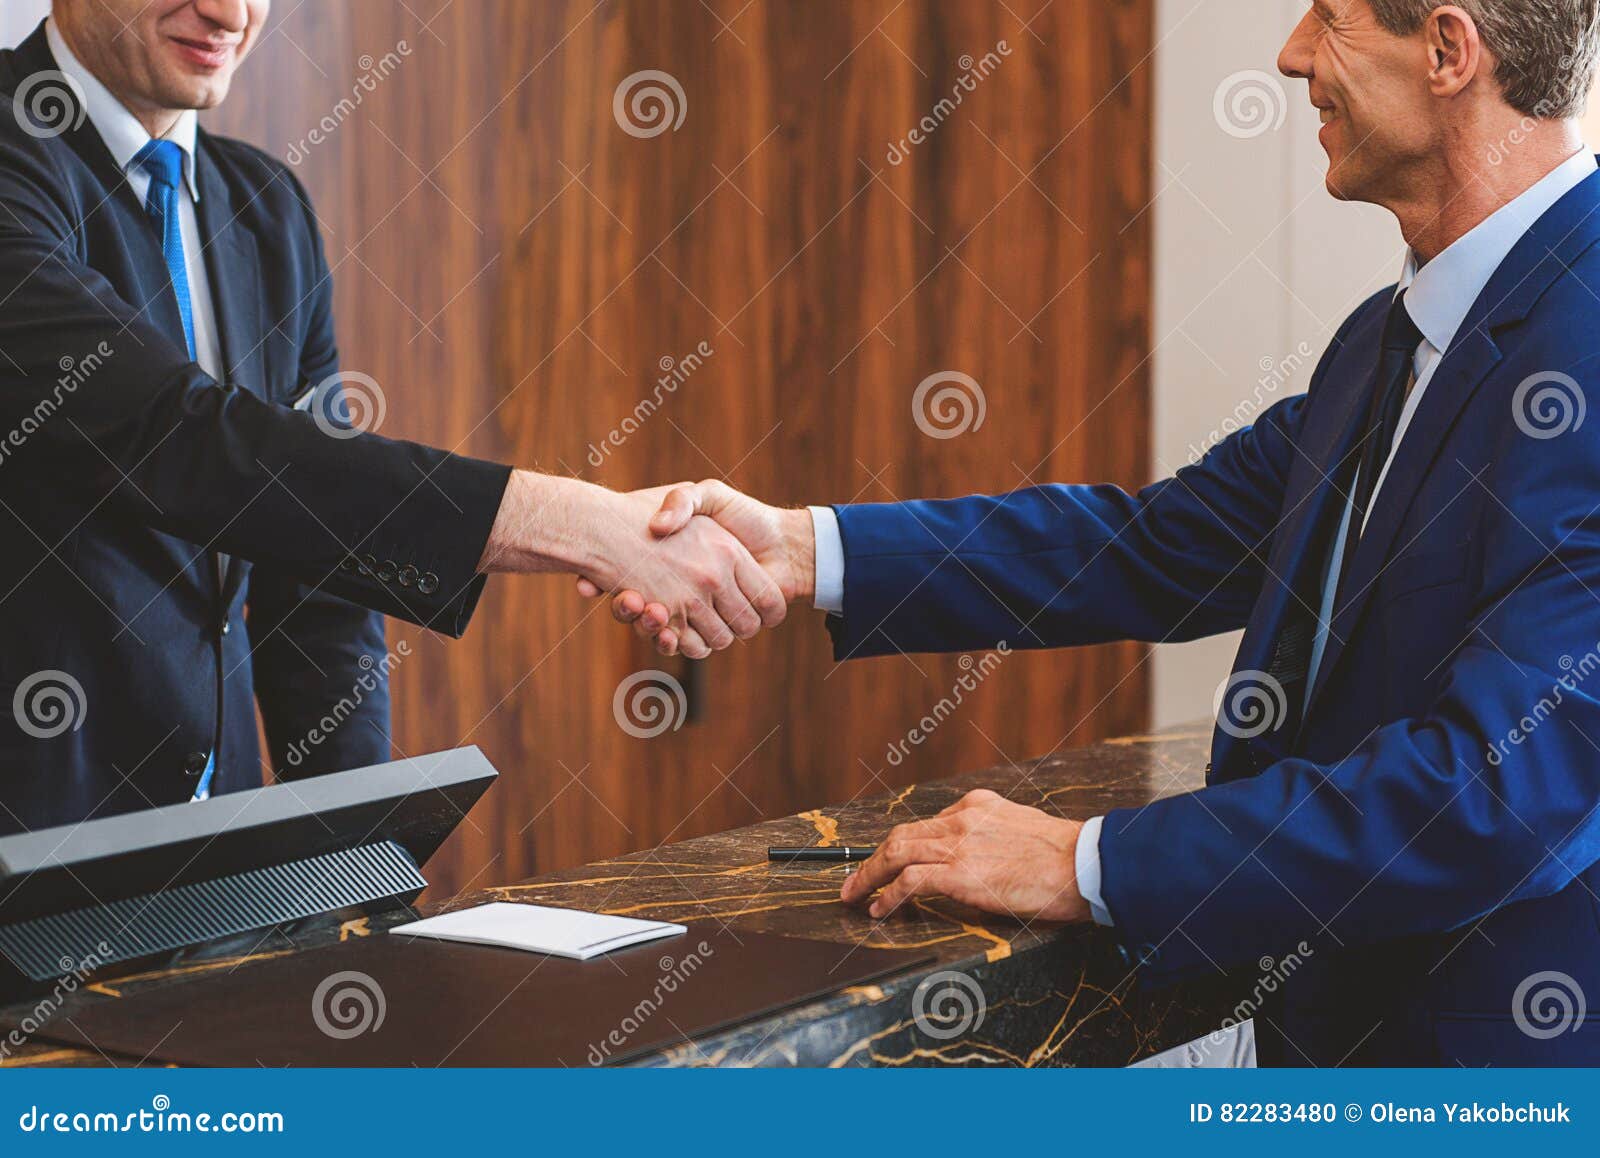 Desk Clerk And Client In Expensive Hotel Stock Photo Image Of